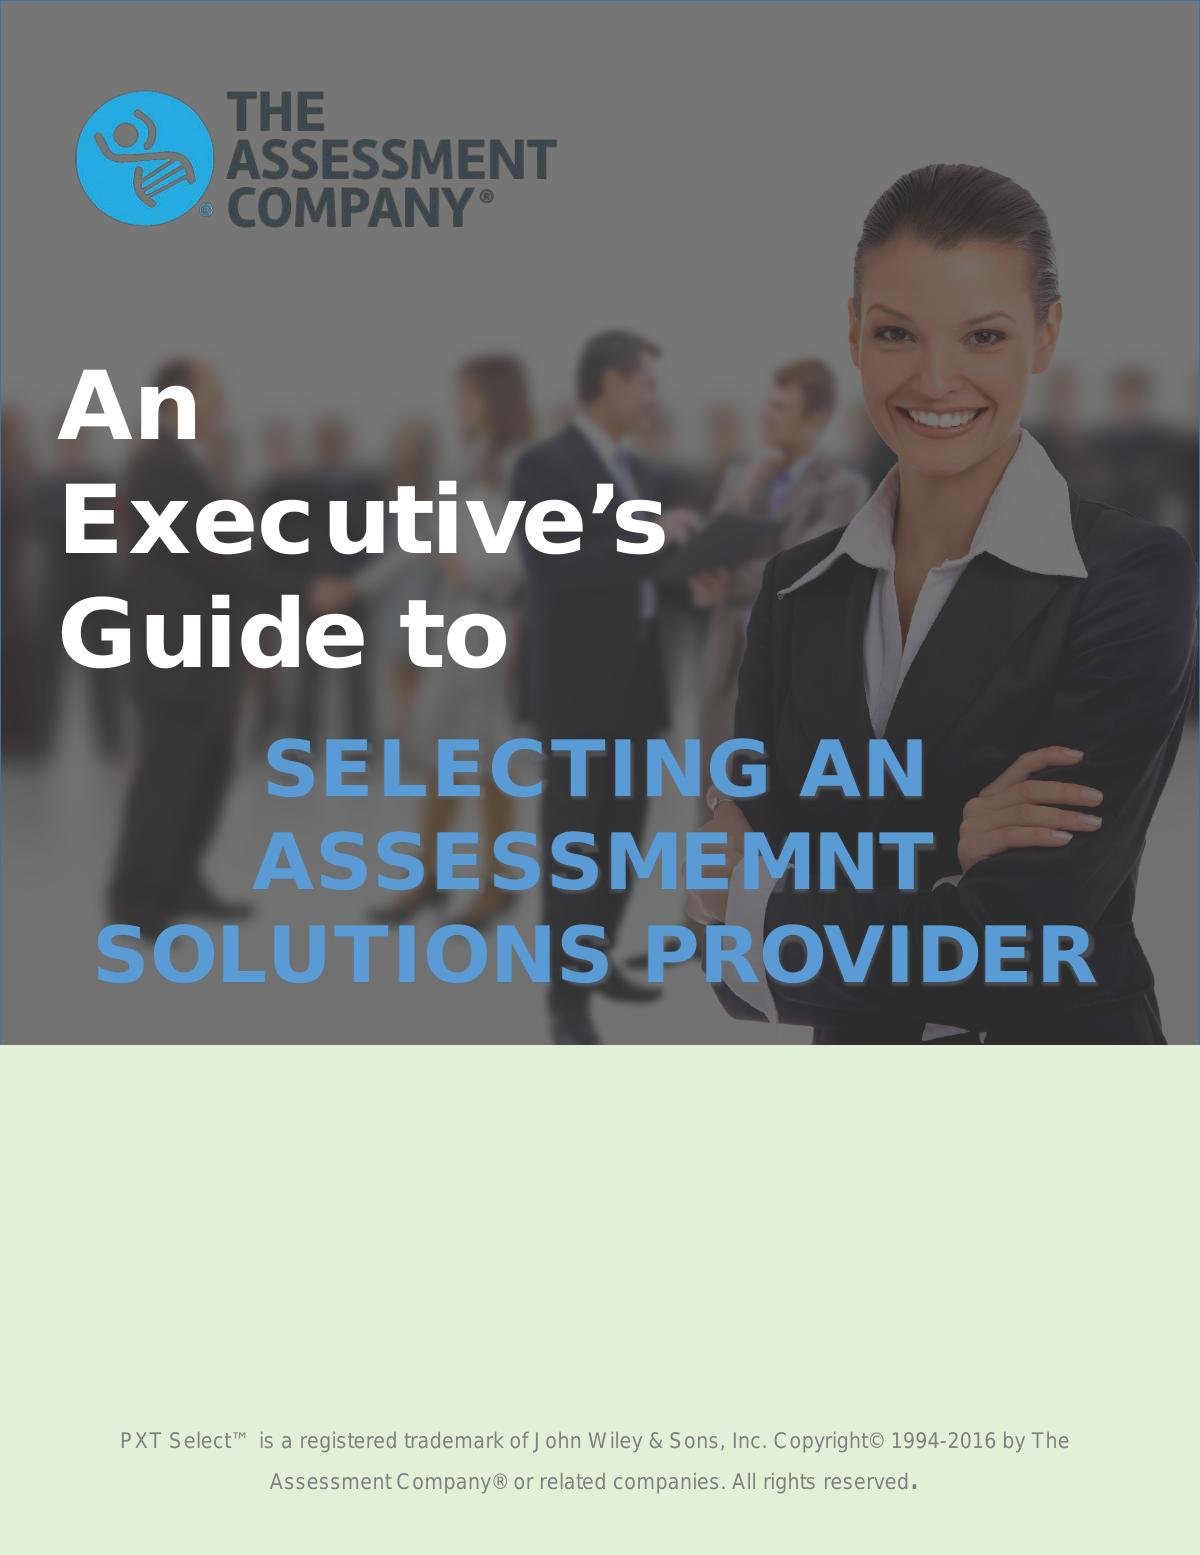 An Executive's Guide to Selecting an Assessment Solutions Provider